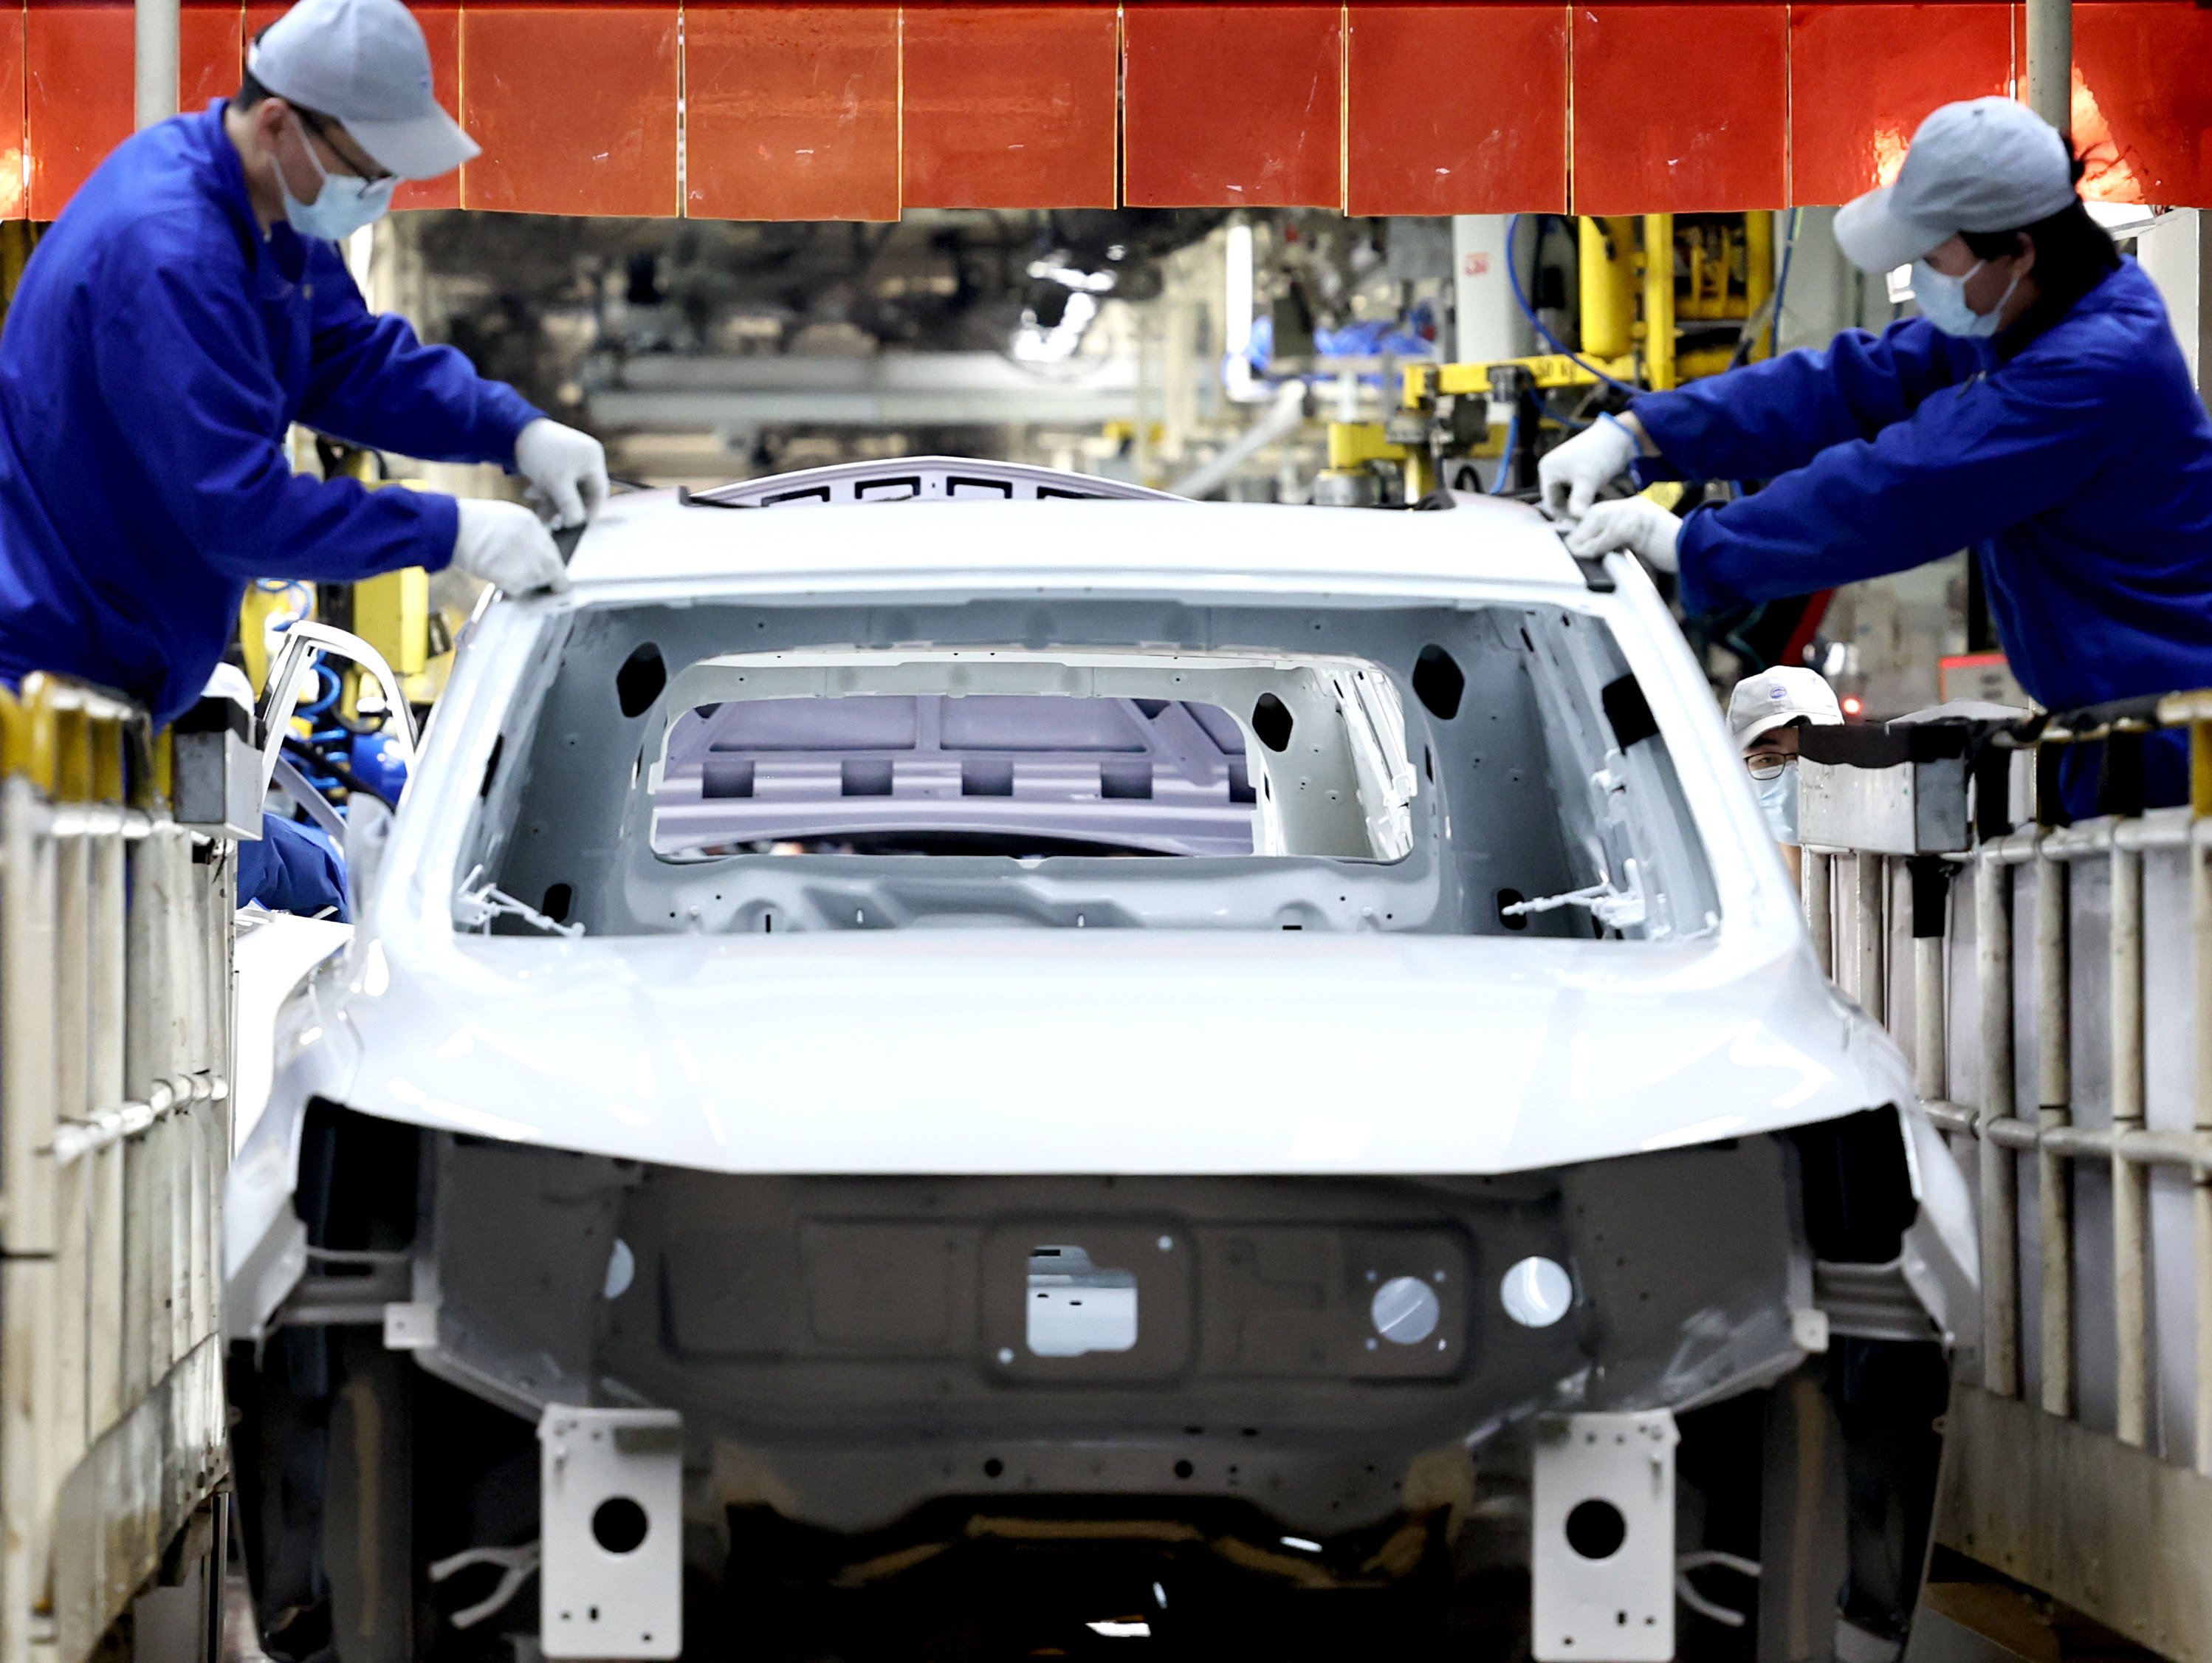 Chinese factory workers assemble a car at an SAIC Motor plant in Shanghai. Photo: Xinhua